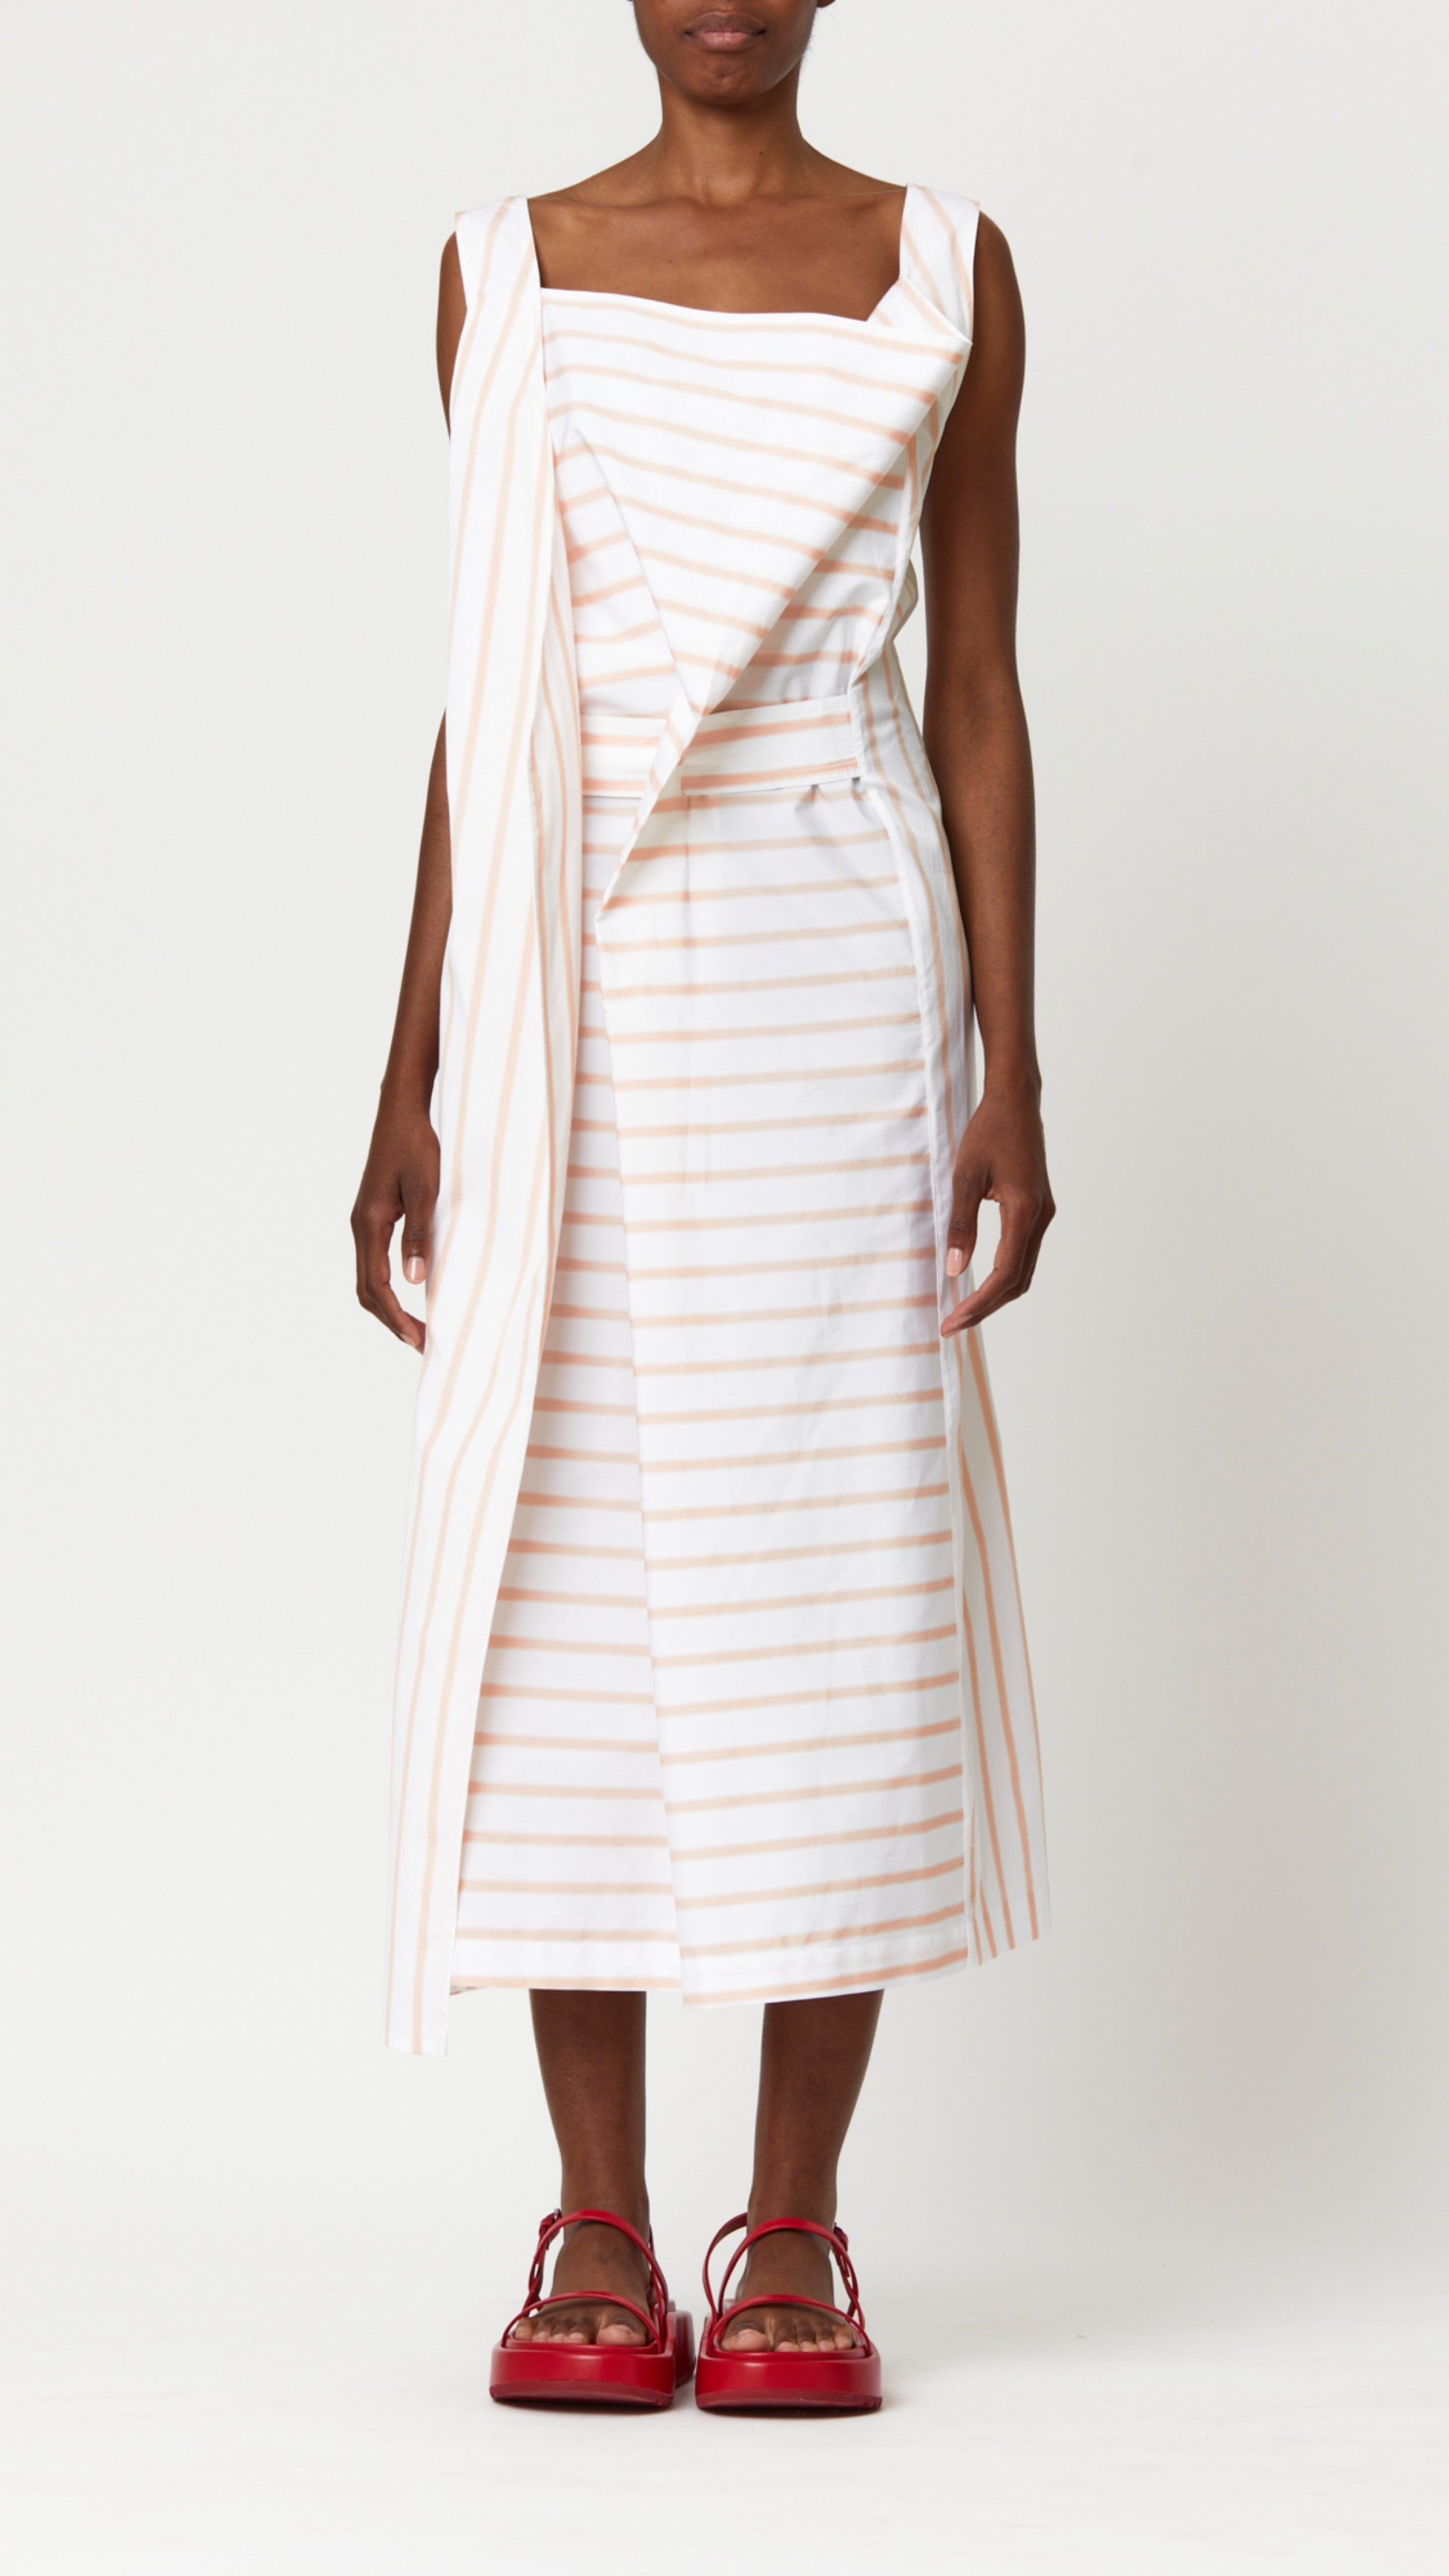 Plan C Cotton Dress in Bellini Stripe Italian-made soft cotton midi dress with bellini stripes. With a square neckline, front draping and cinched waist with fabric belt. Shown on model facing front.